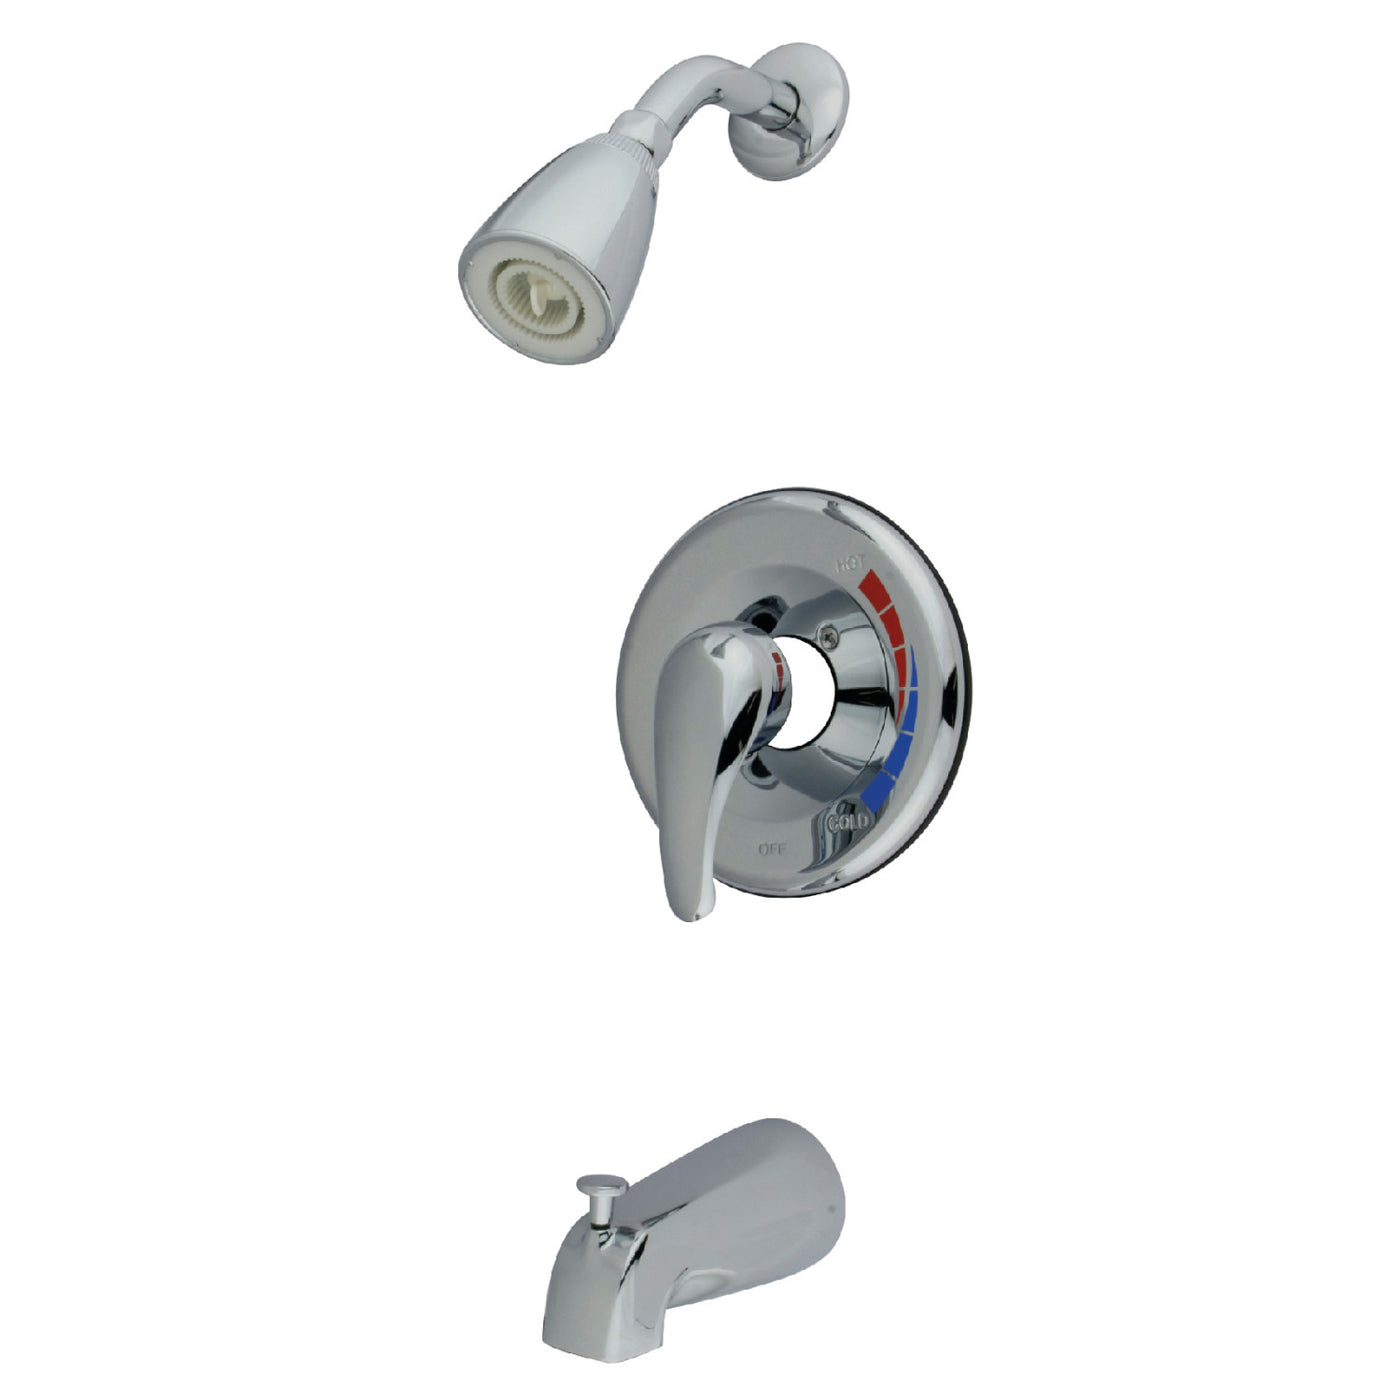 Elements of Design EB651T Trim Only for Single Lever Handle Tub and Shower Faucet, Polished Chrome